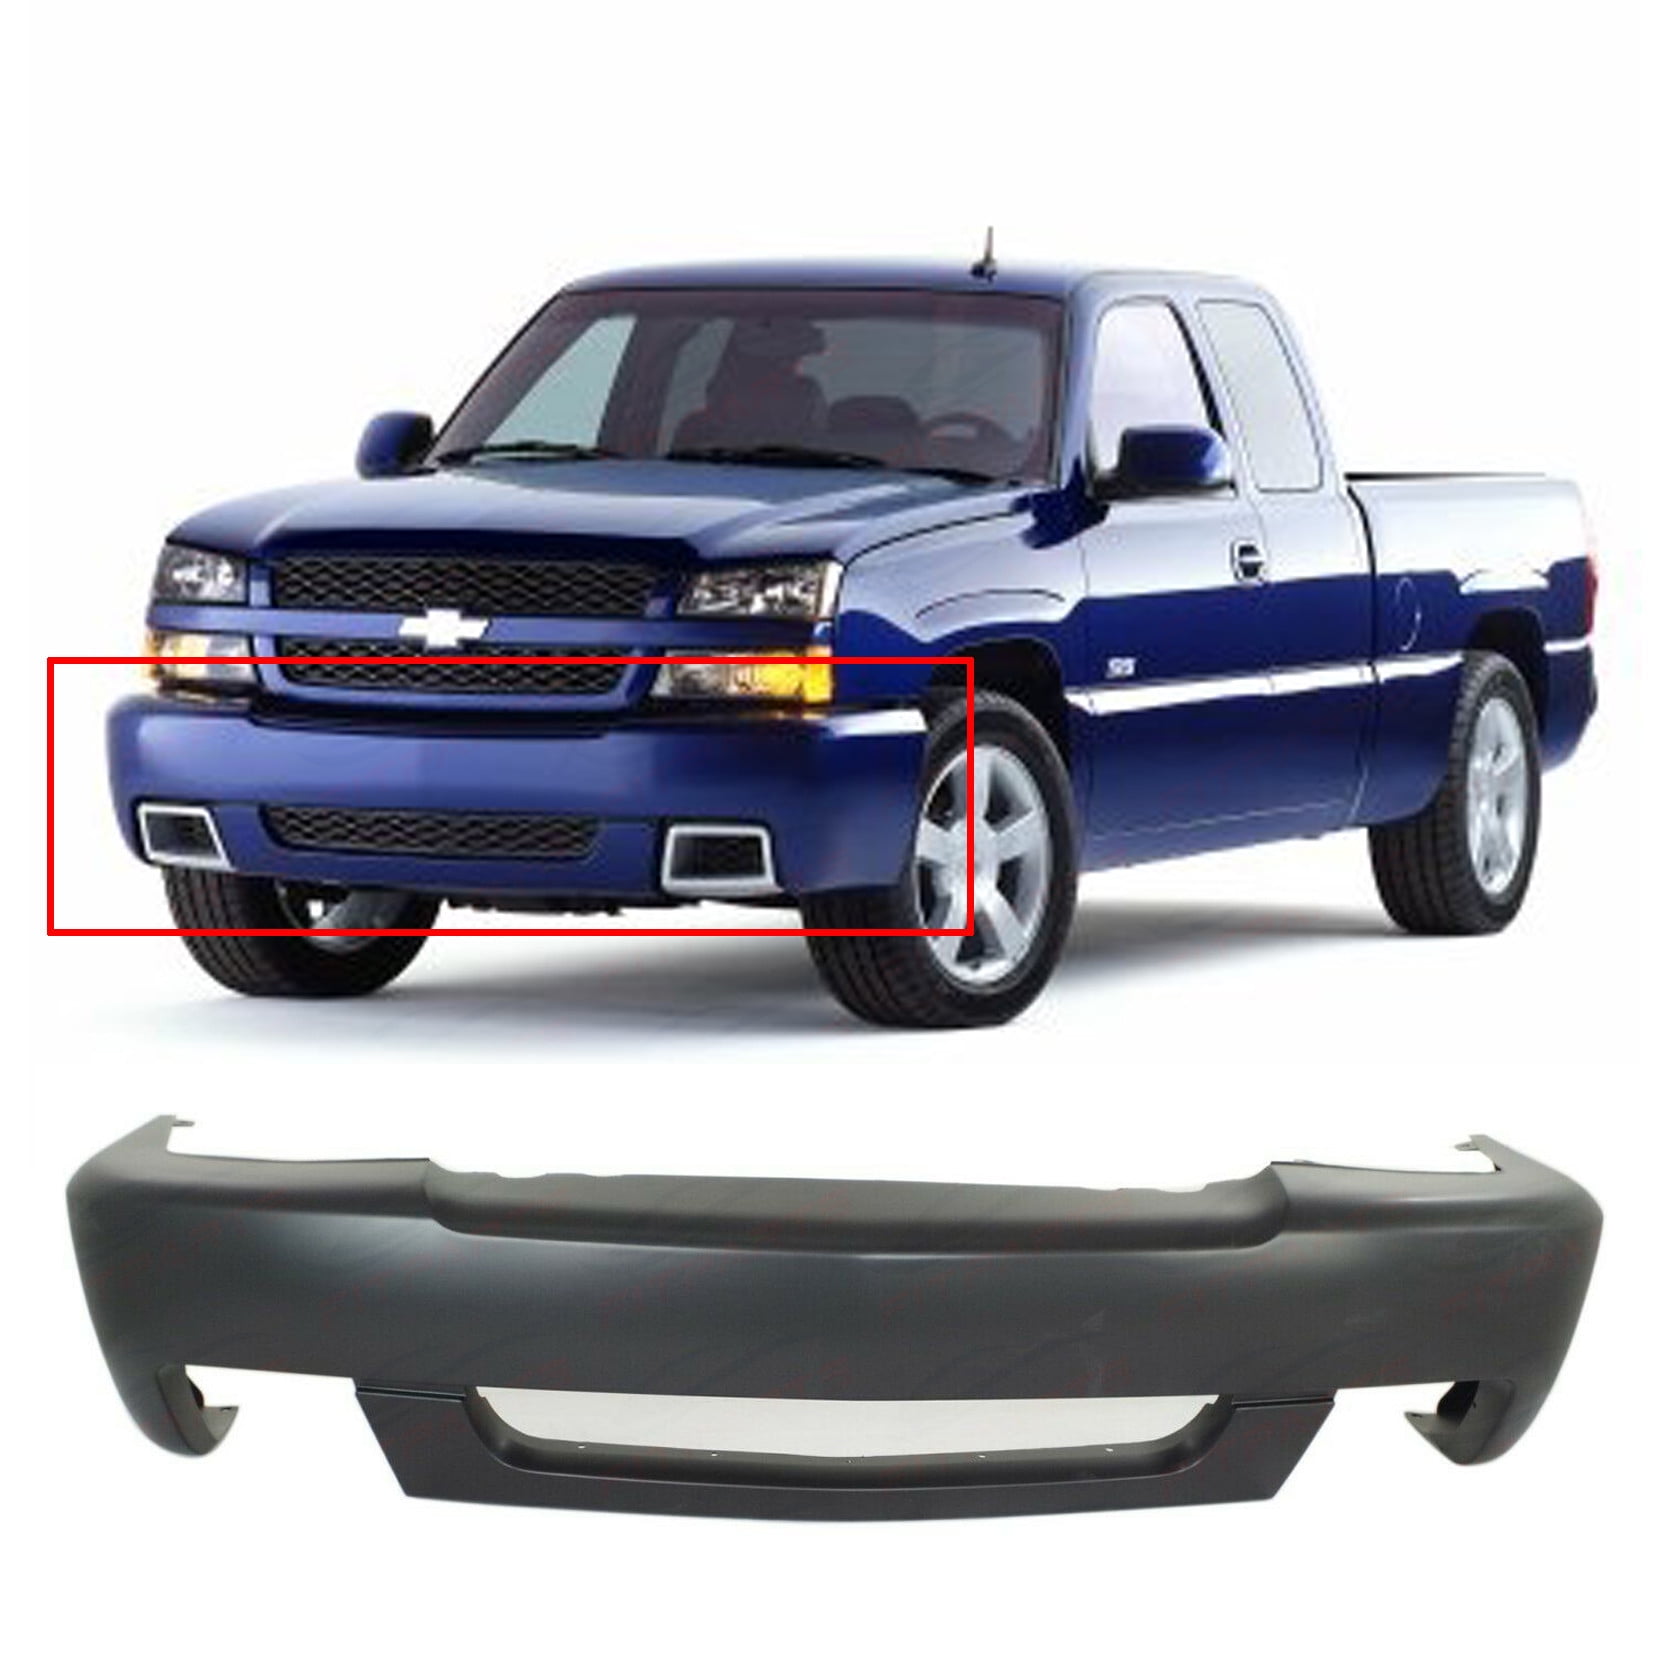 NEW Textured Front Bumper Top Cover for 2003-2007 Silverado 2500 3500 HD Pickup 